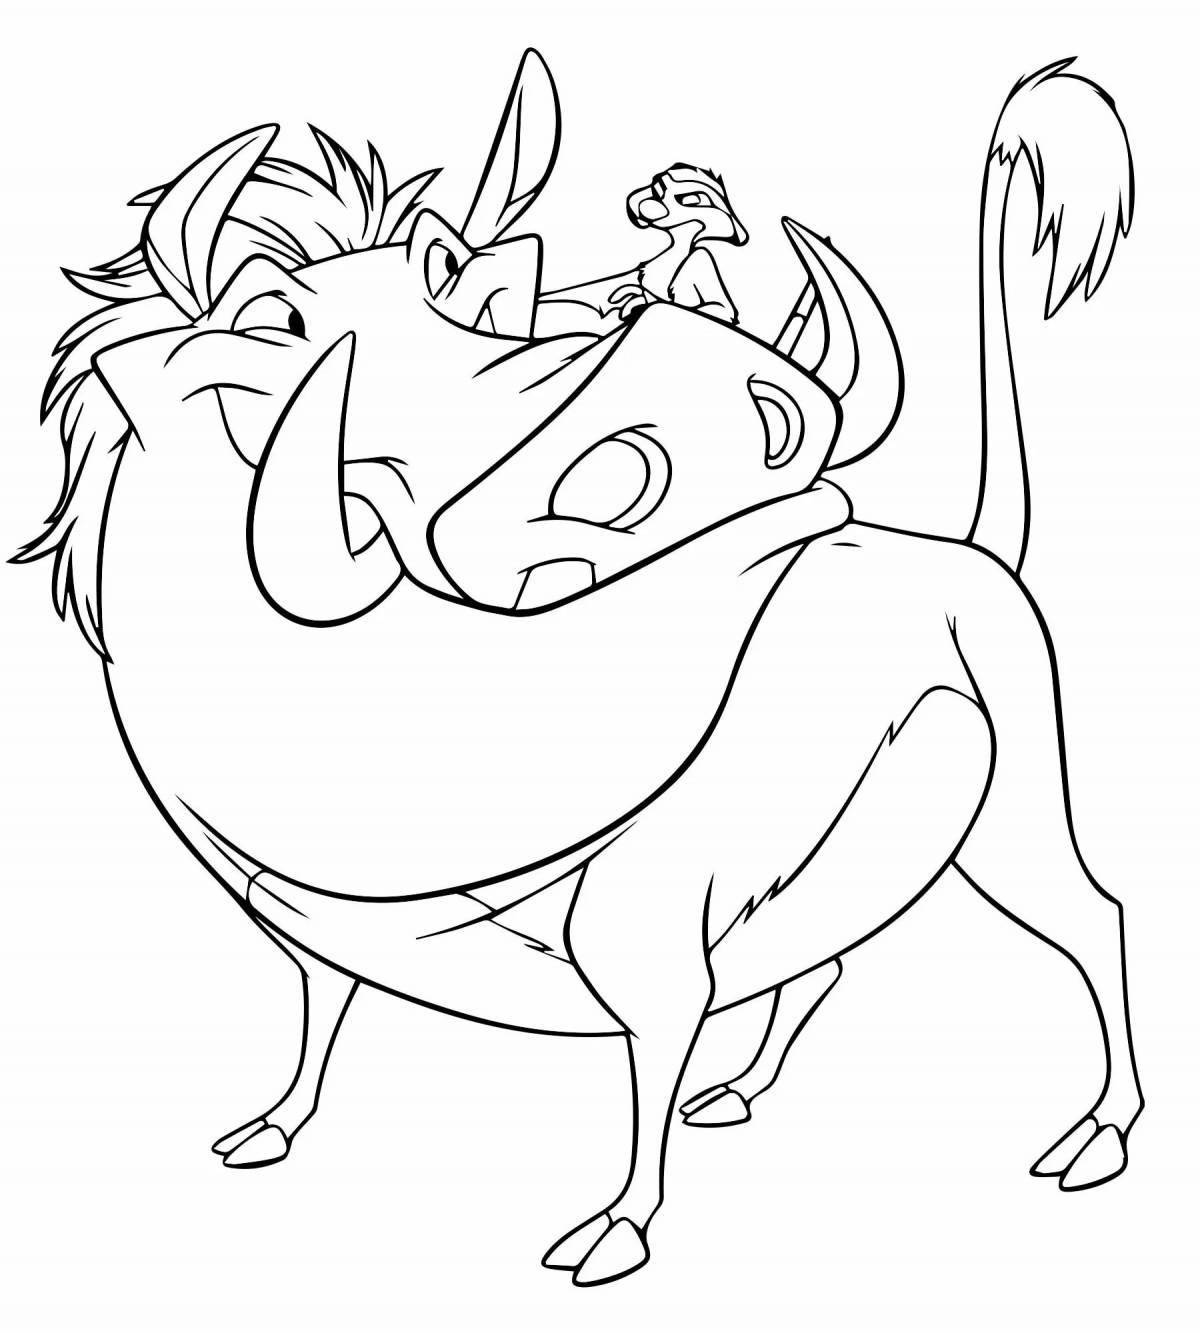 Timon and Pumbaa awesome coloring book